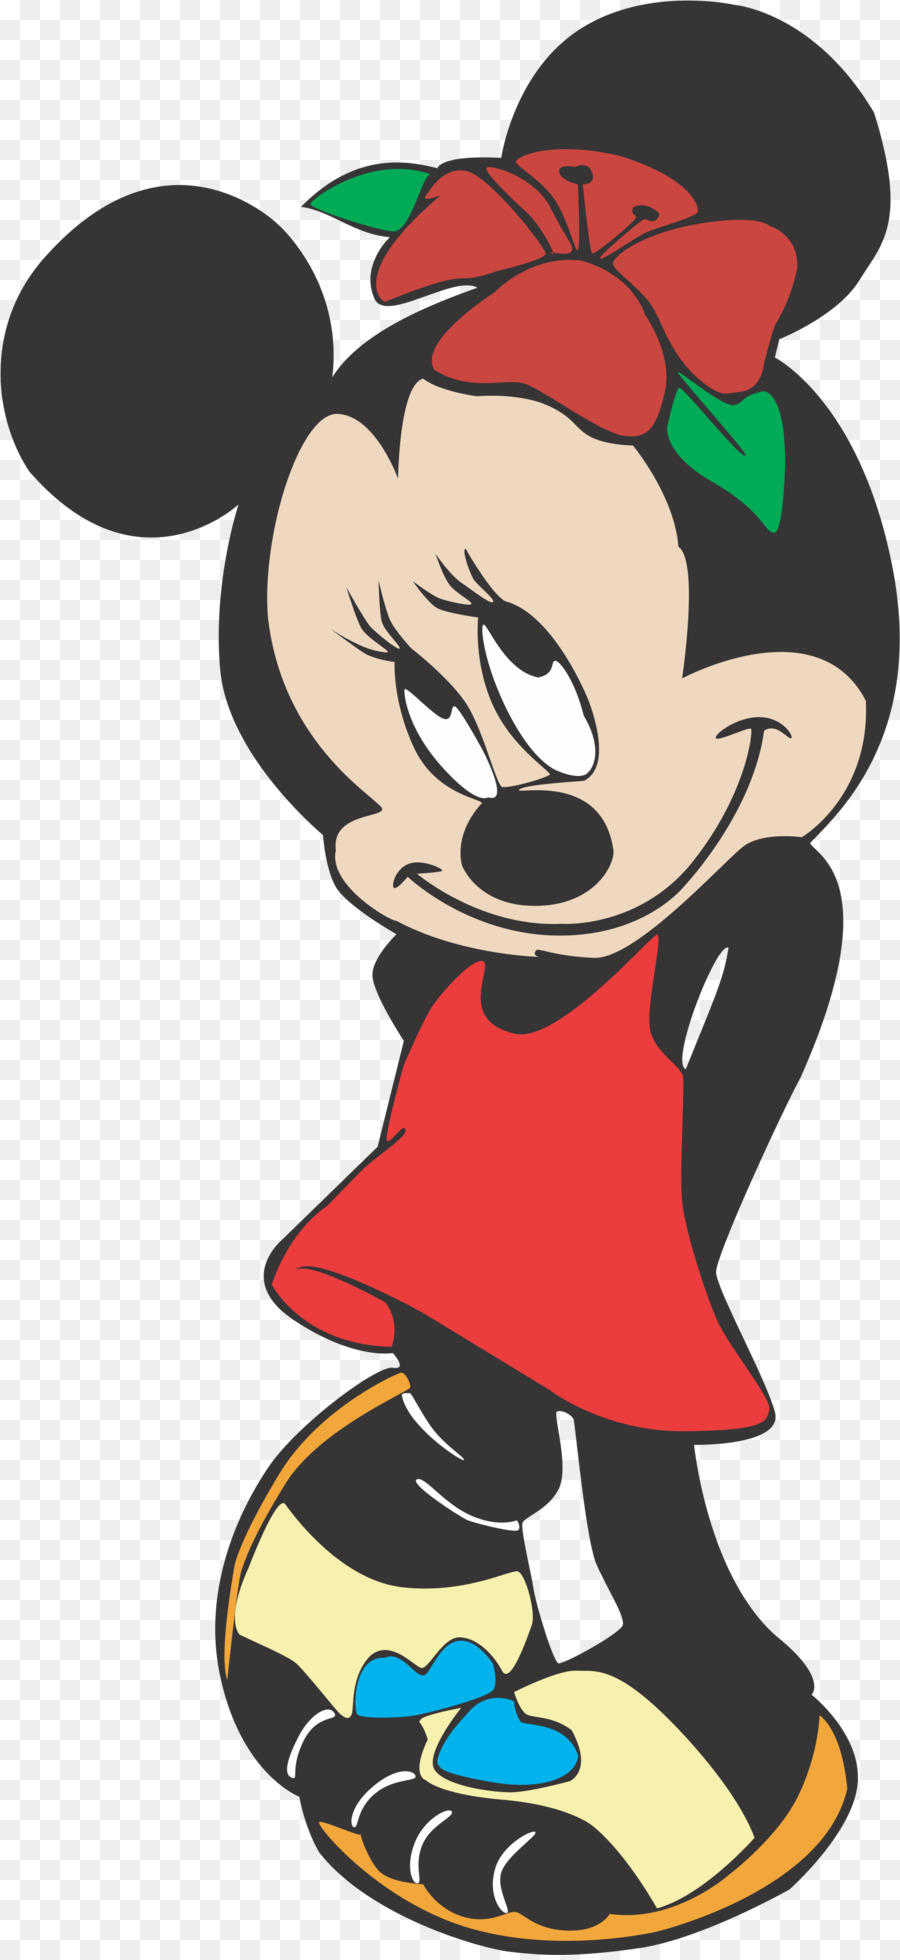 Minnie Mouse Mickey Mouse Donald Duck The Walt Disney Company - disney pluto png download - 1581*3434 - Free Transparent Minnie Mouse png Download.